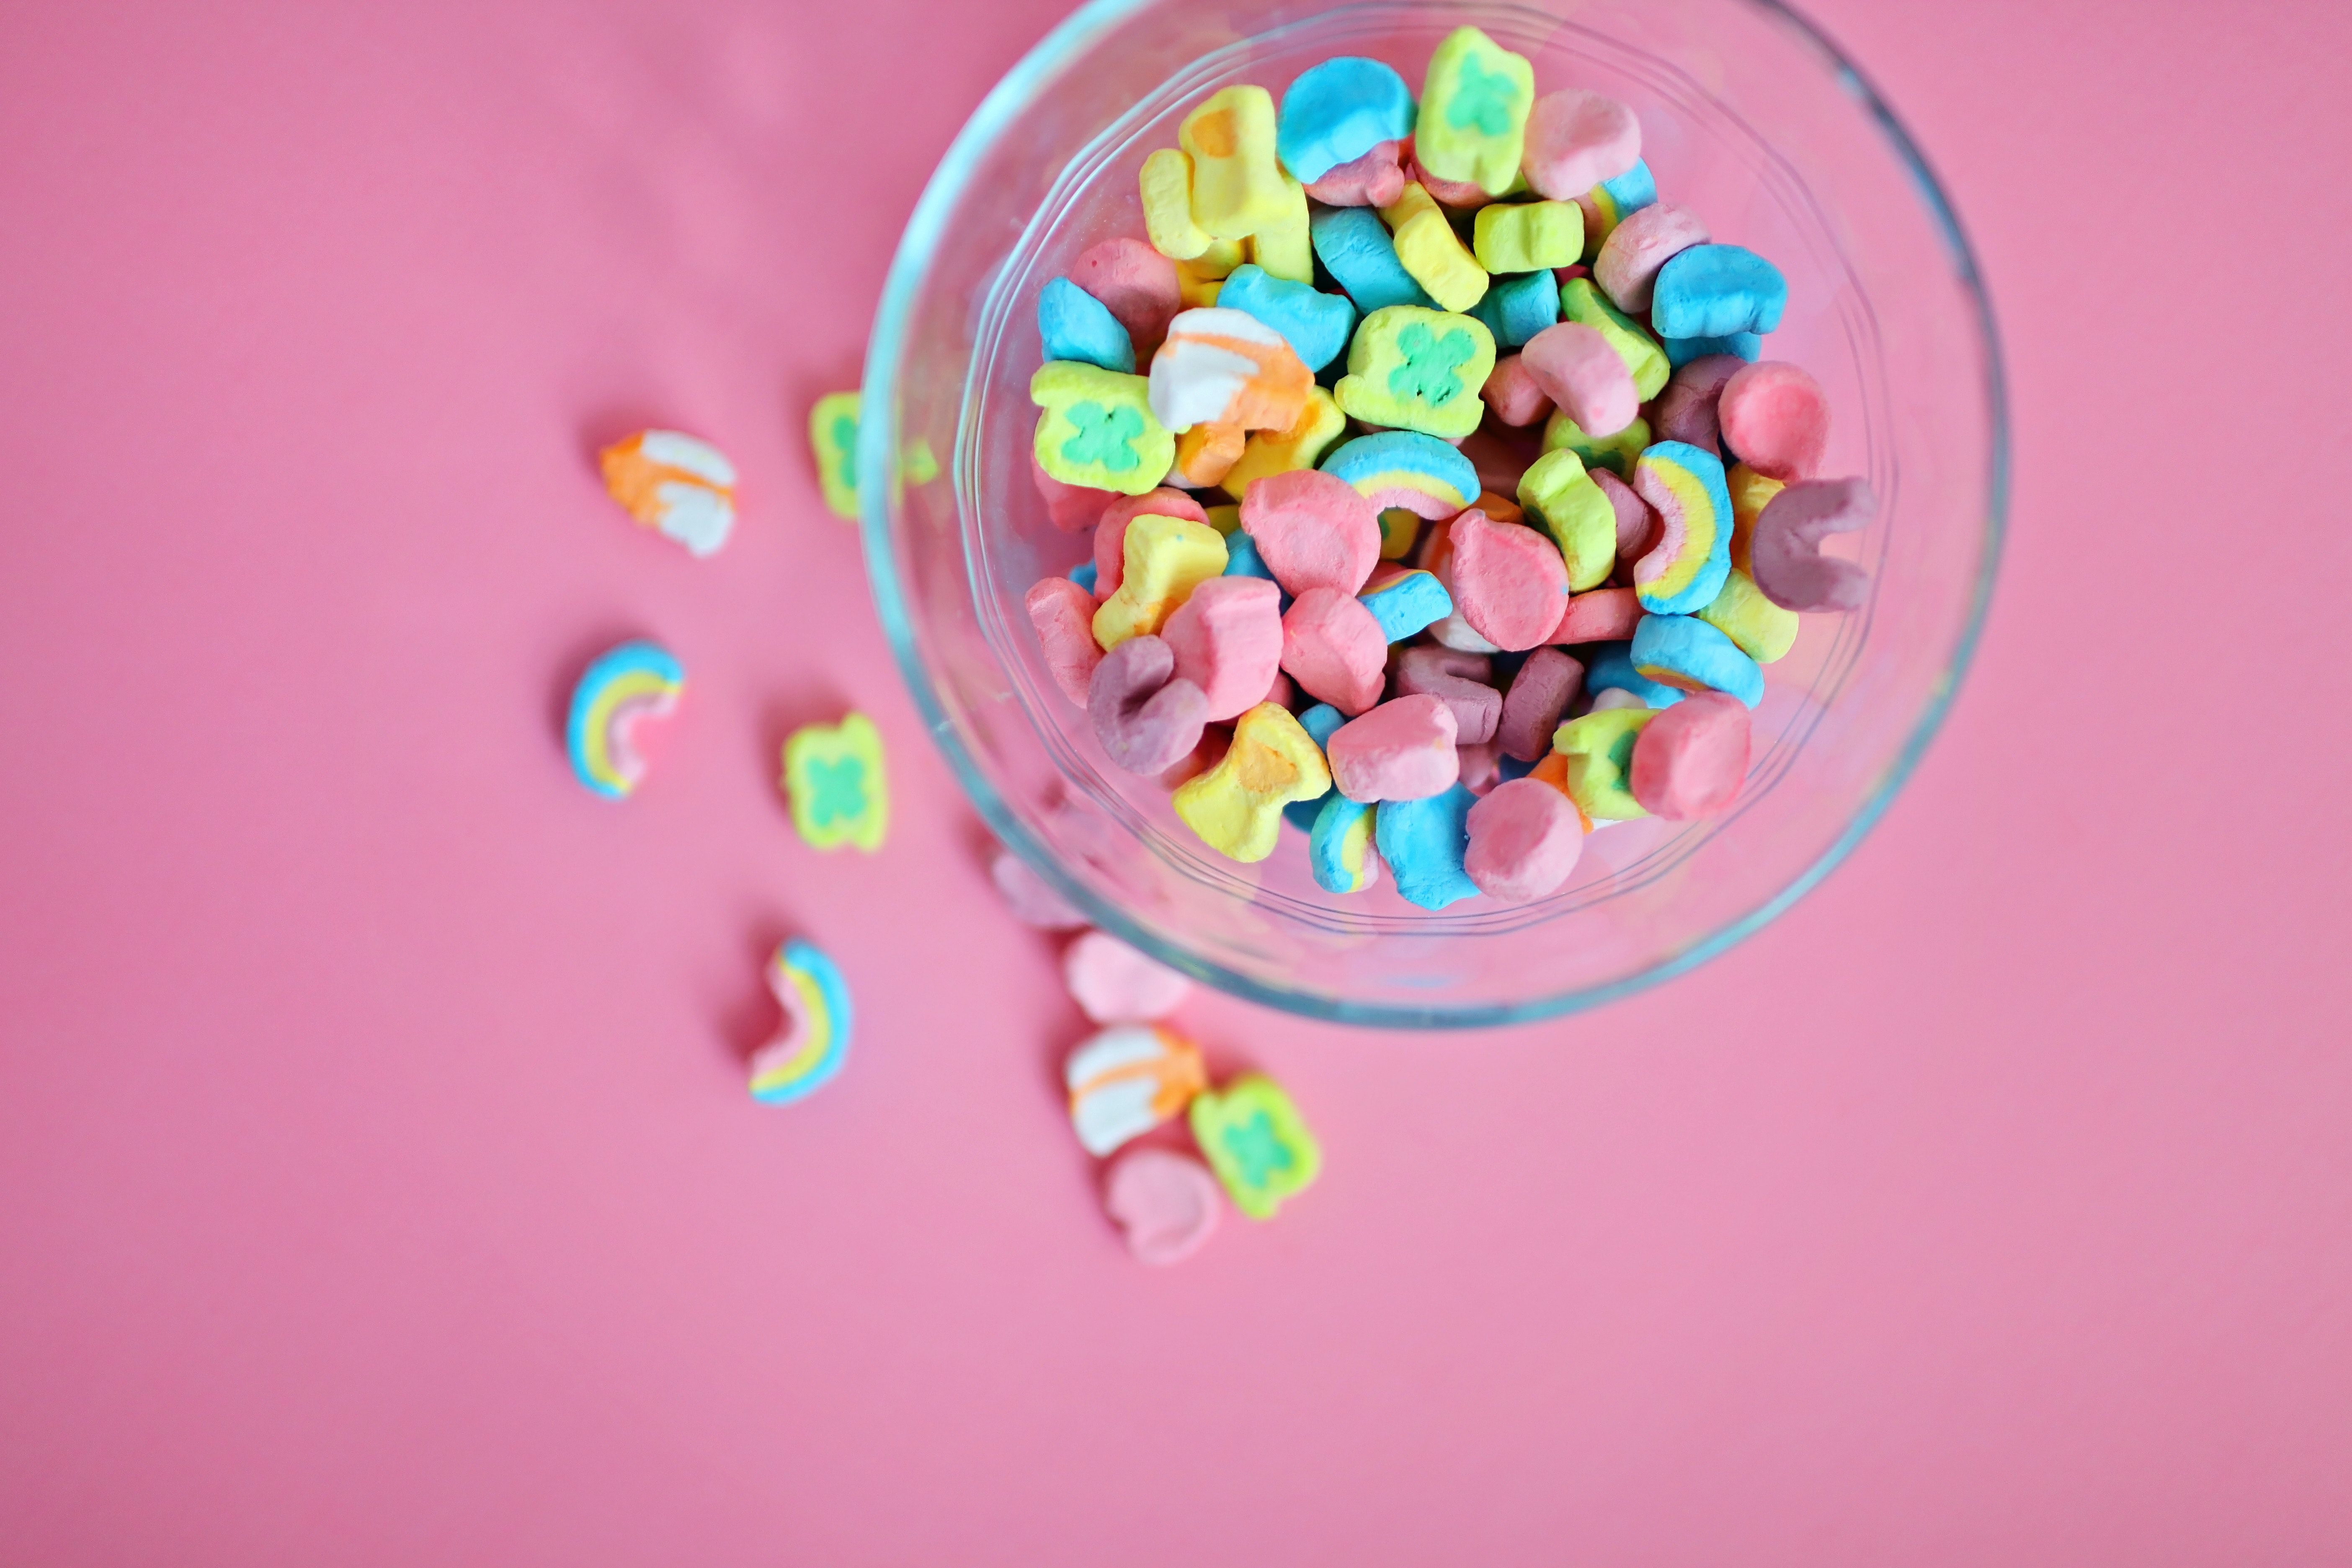 A glass bowl of marshmallows on a pink background. - Candy